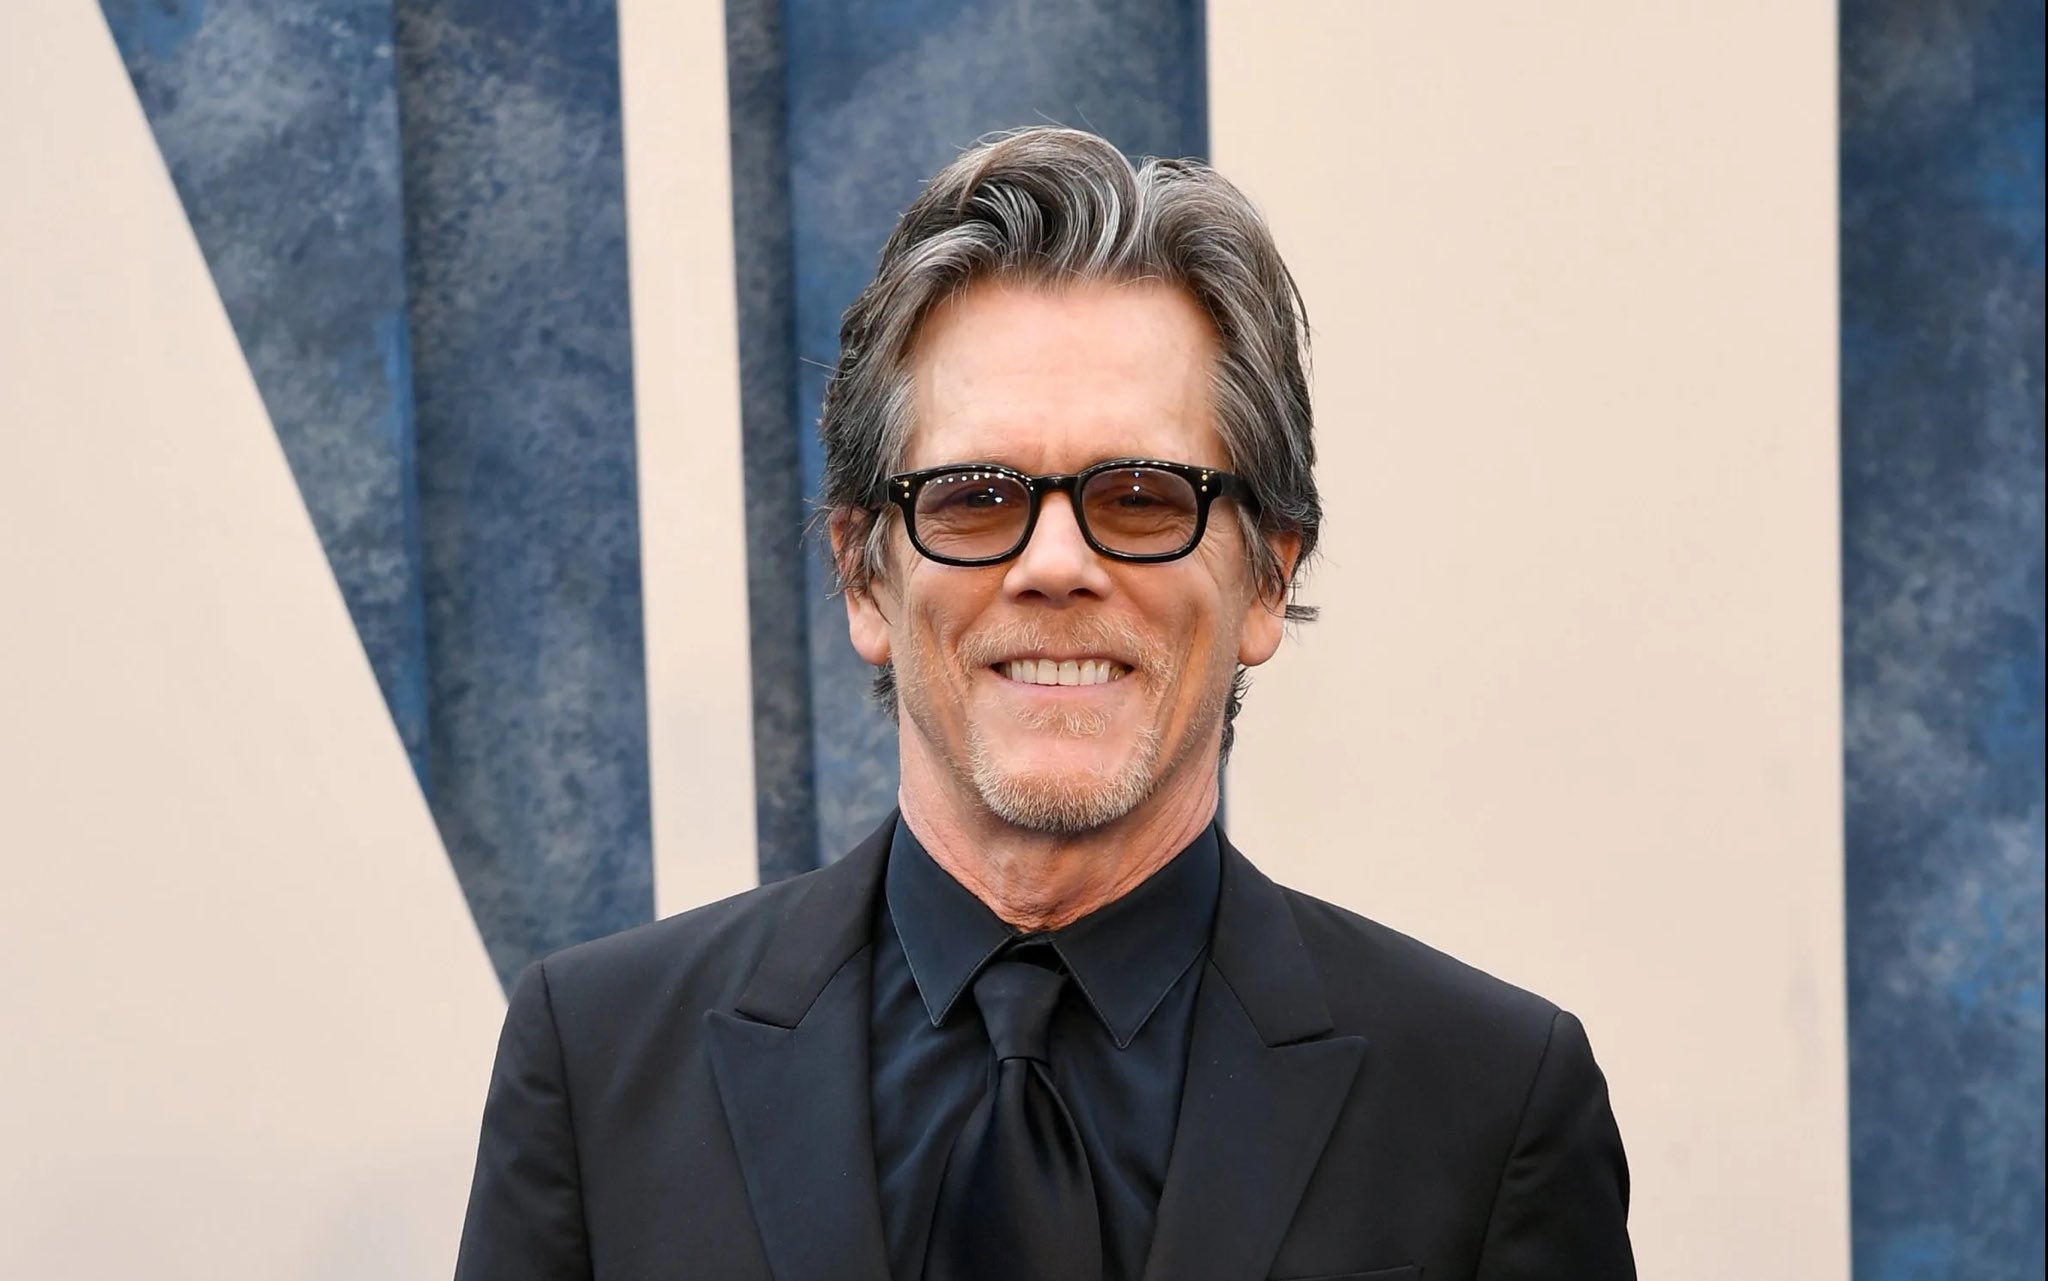 A very happy birthday to the one and only Kevin Bacon!  